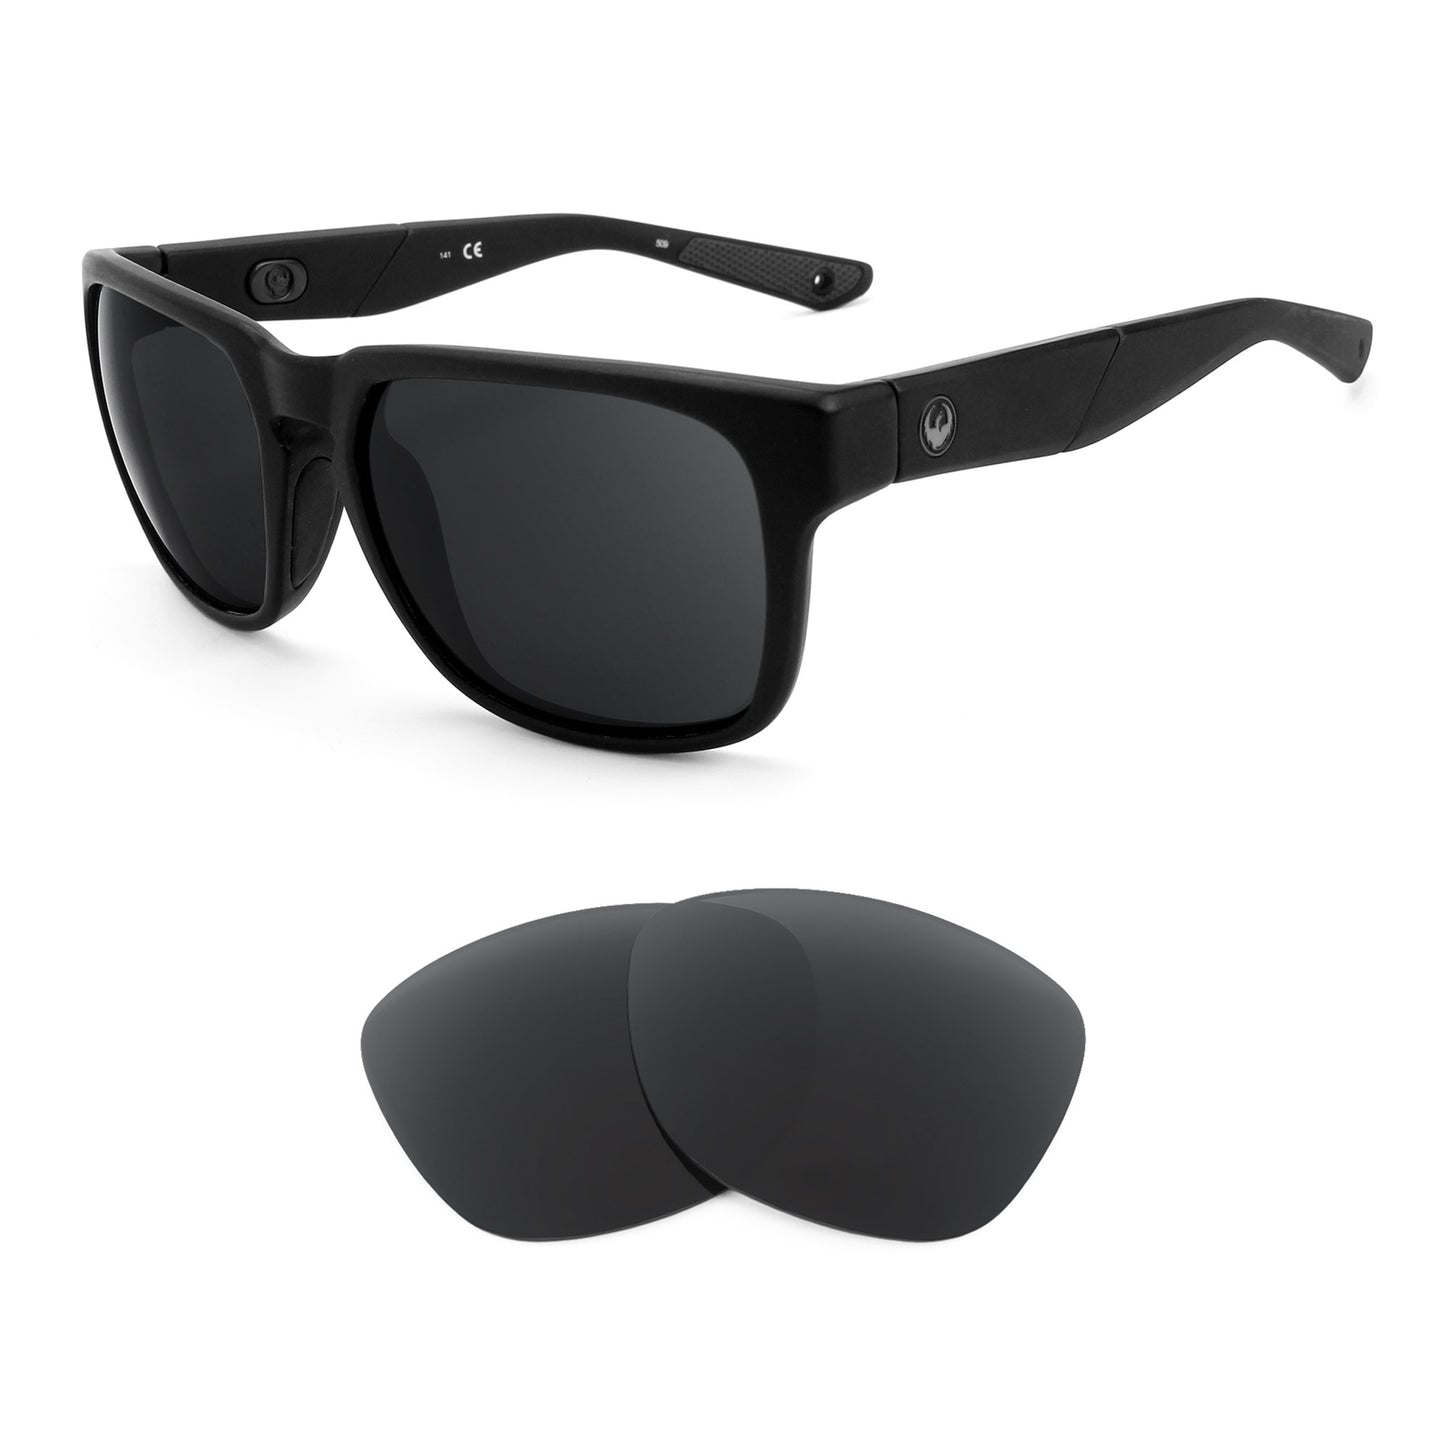 Dragon SeafarerX sunglasses with replacement lenses